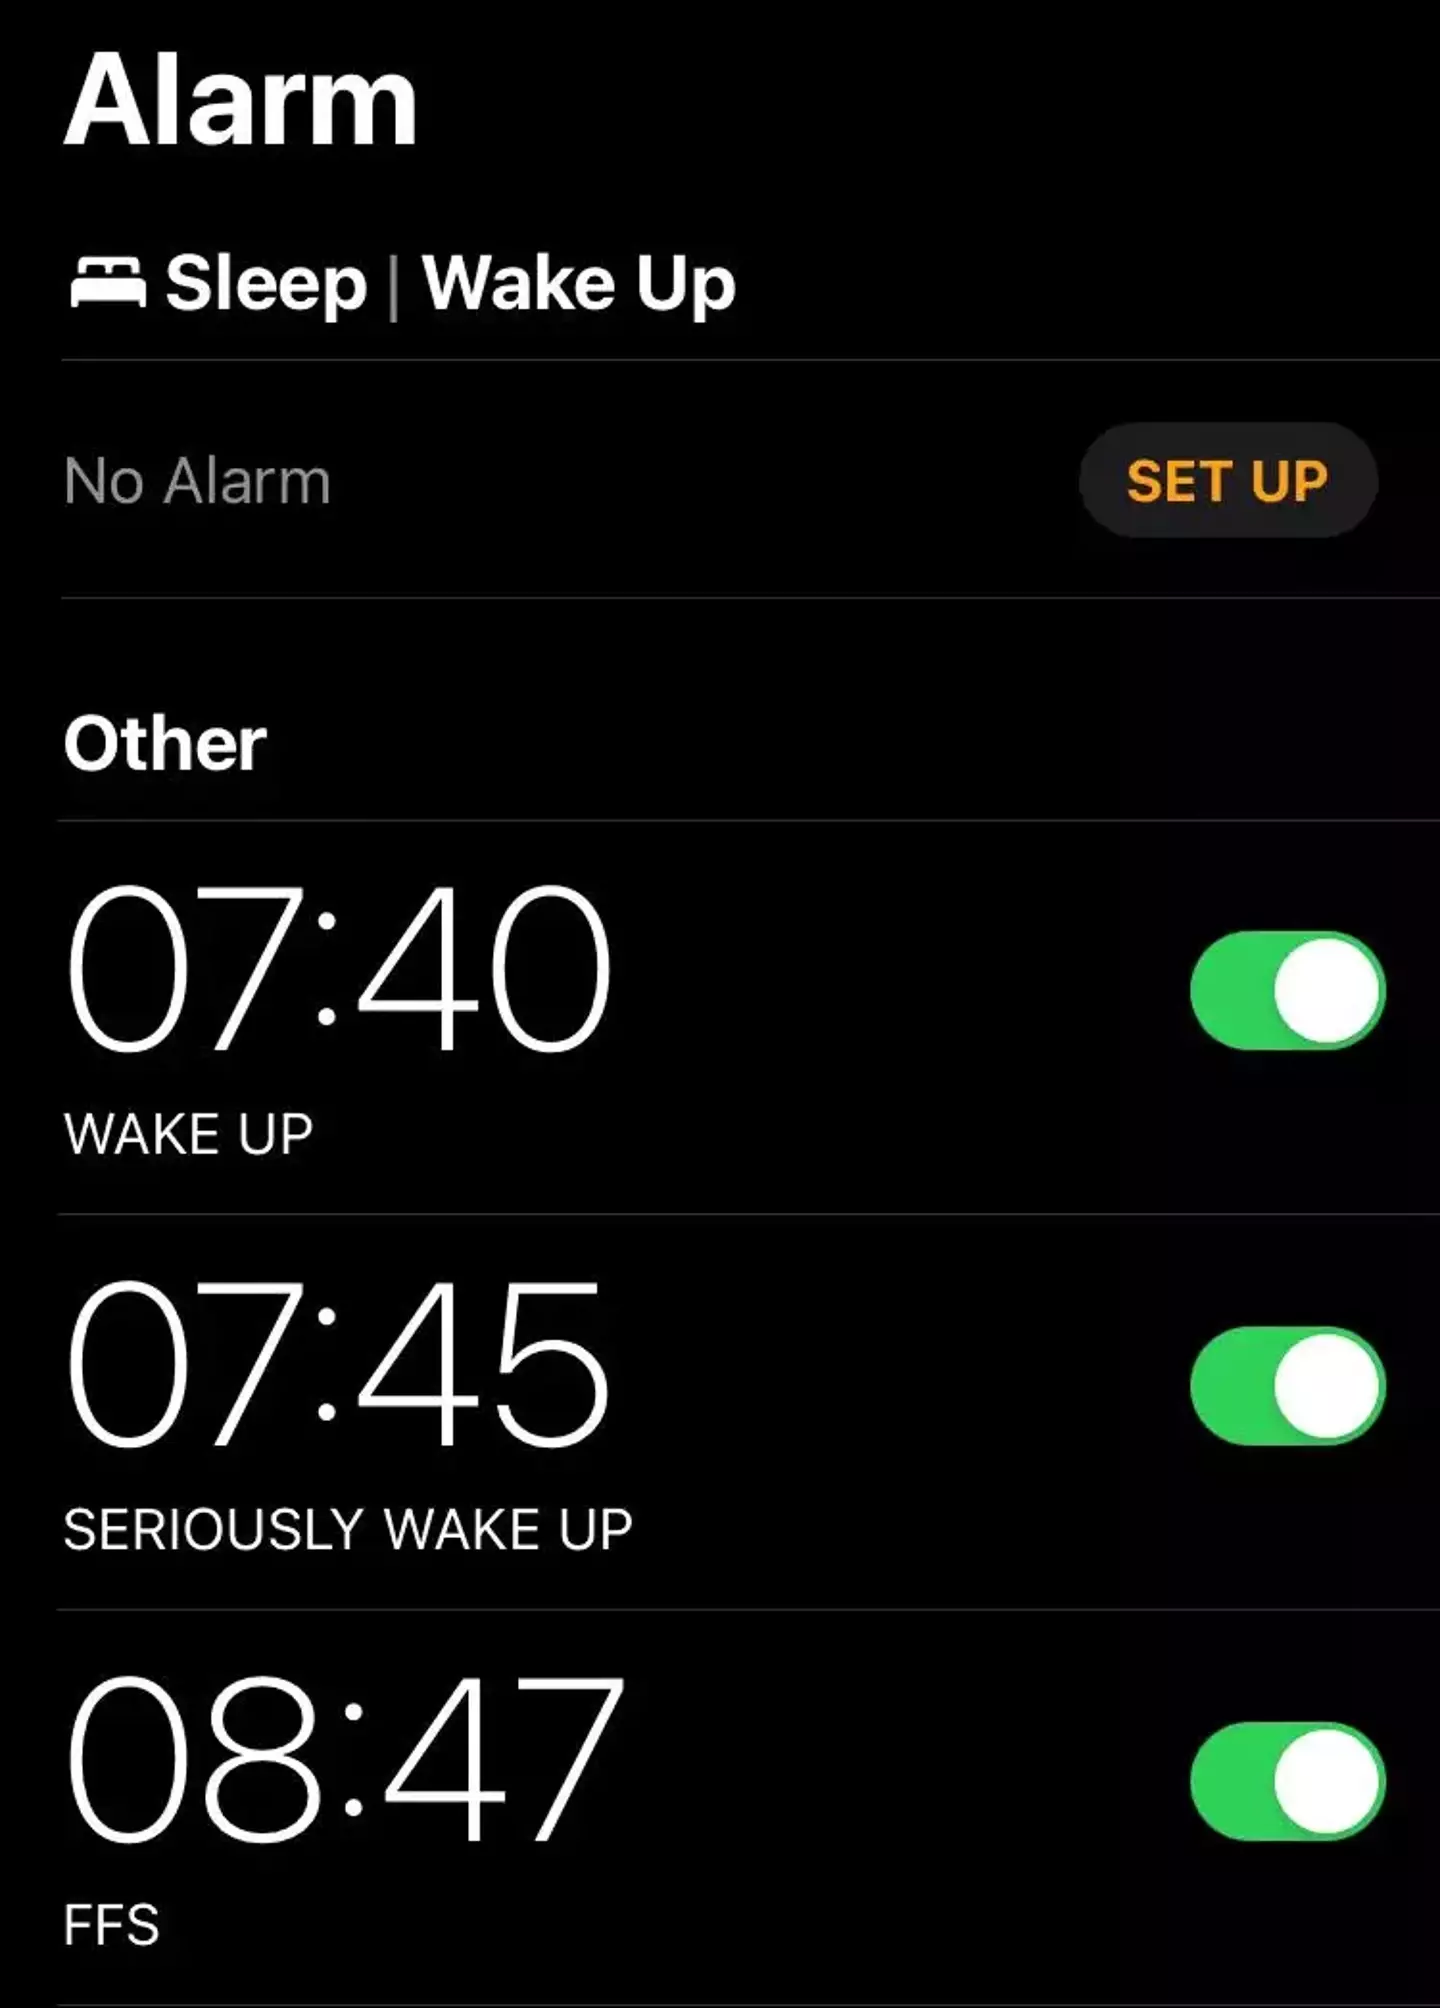 People's alarms aren't going off in the morning.